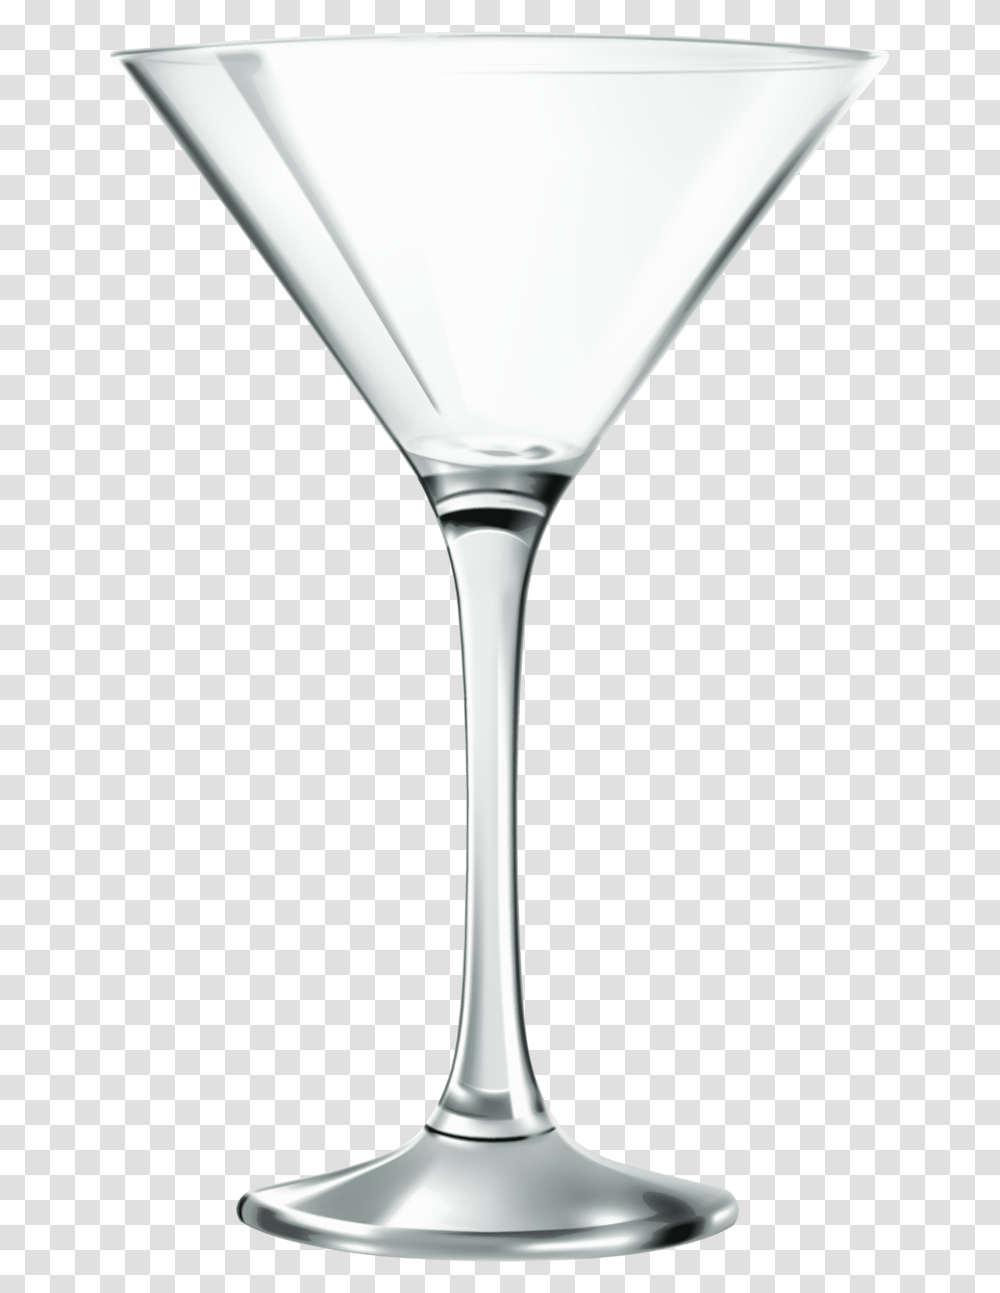 Empty Martini Glass Background Martini Glass, Cocktail, Alcohol, Beverage, Drink Transparent Png